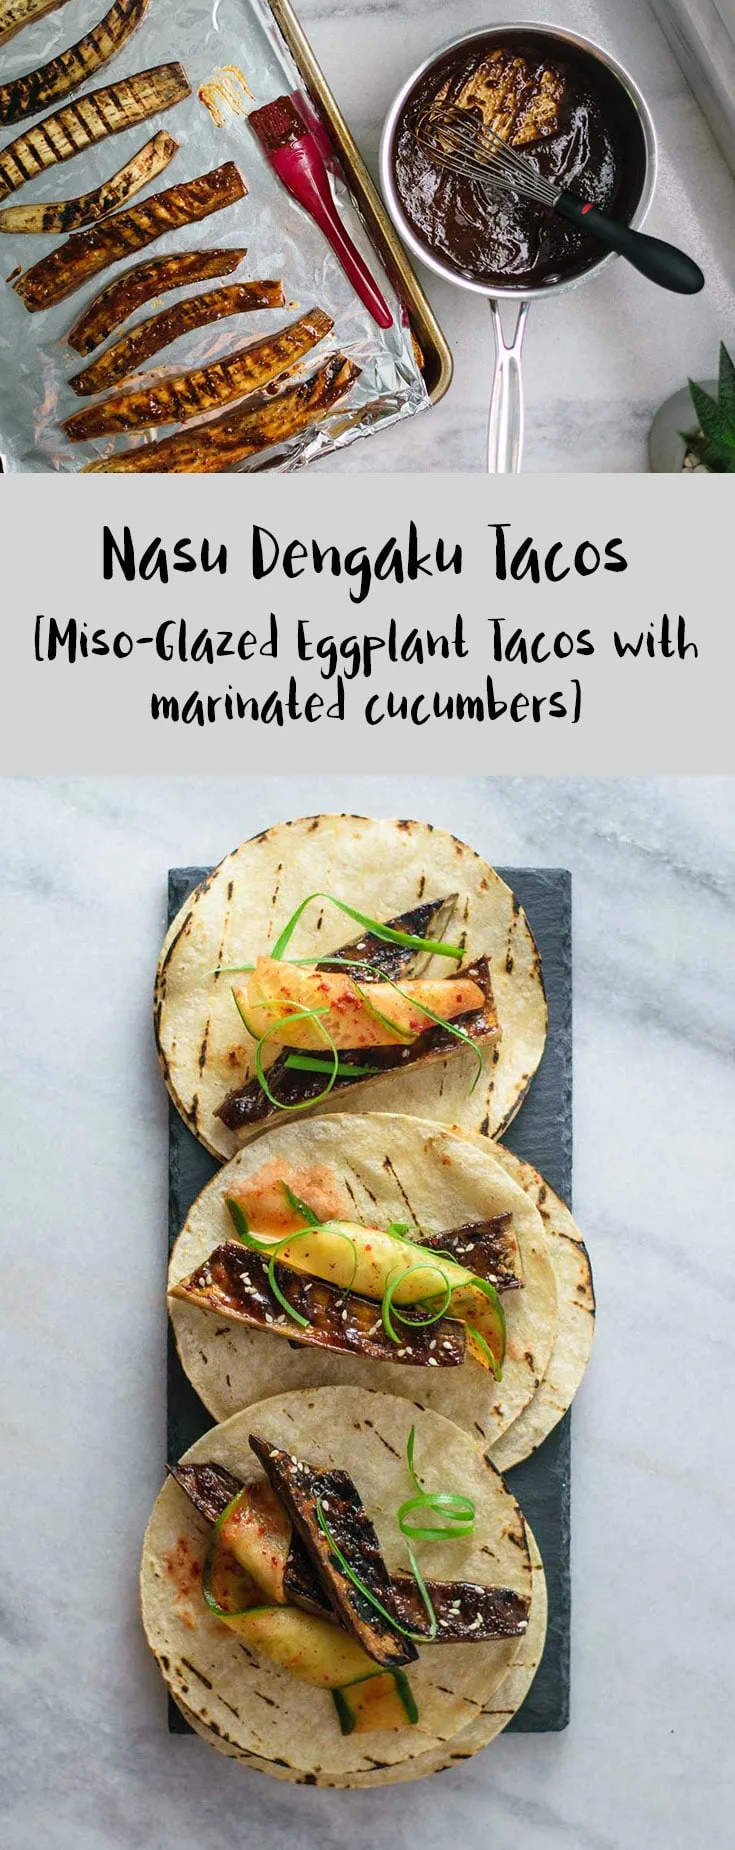 Miso Glazed Eggplant Tacos | Traditional Japanese miso glazed eggplant (nasu dengaku) are stuffed into corn tortillas, along with crisp chili marinated cucumber for a delicious and fun meal. This 30 minute meal is vegan and gluten free. | thecuriouschickpea.com #vegan #Japanese #tacos